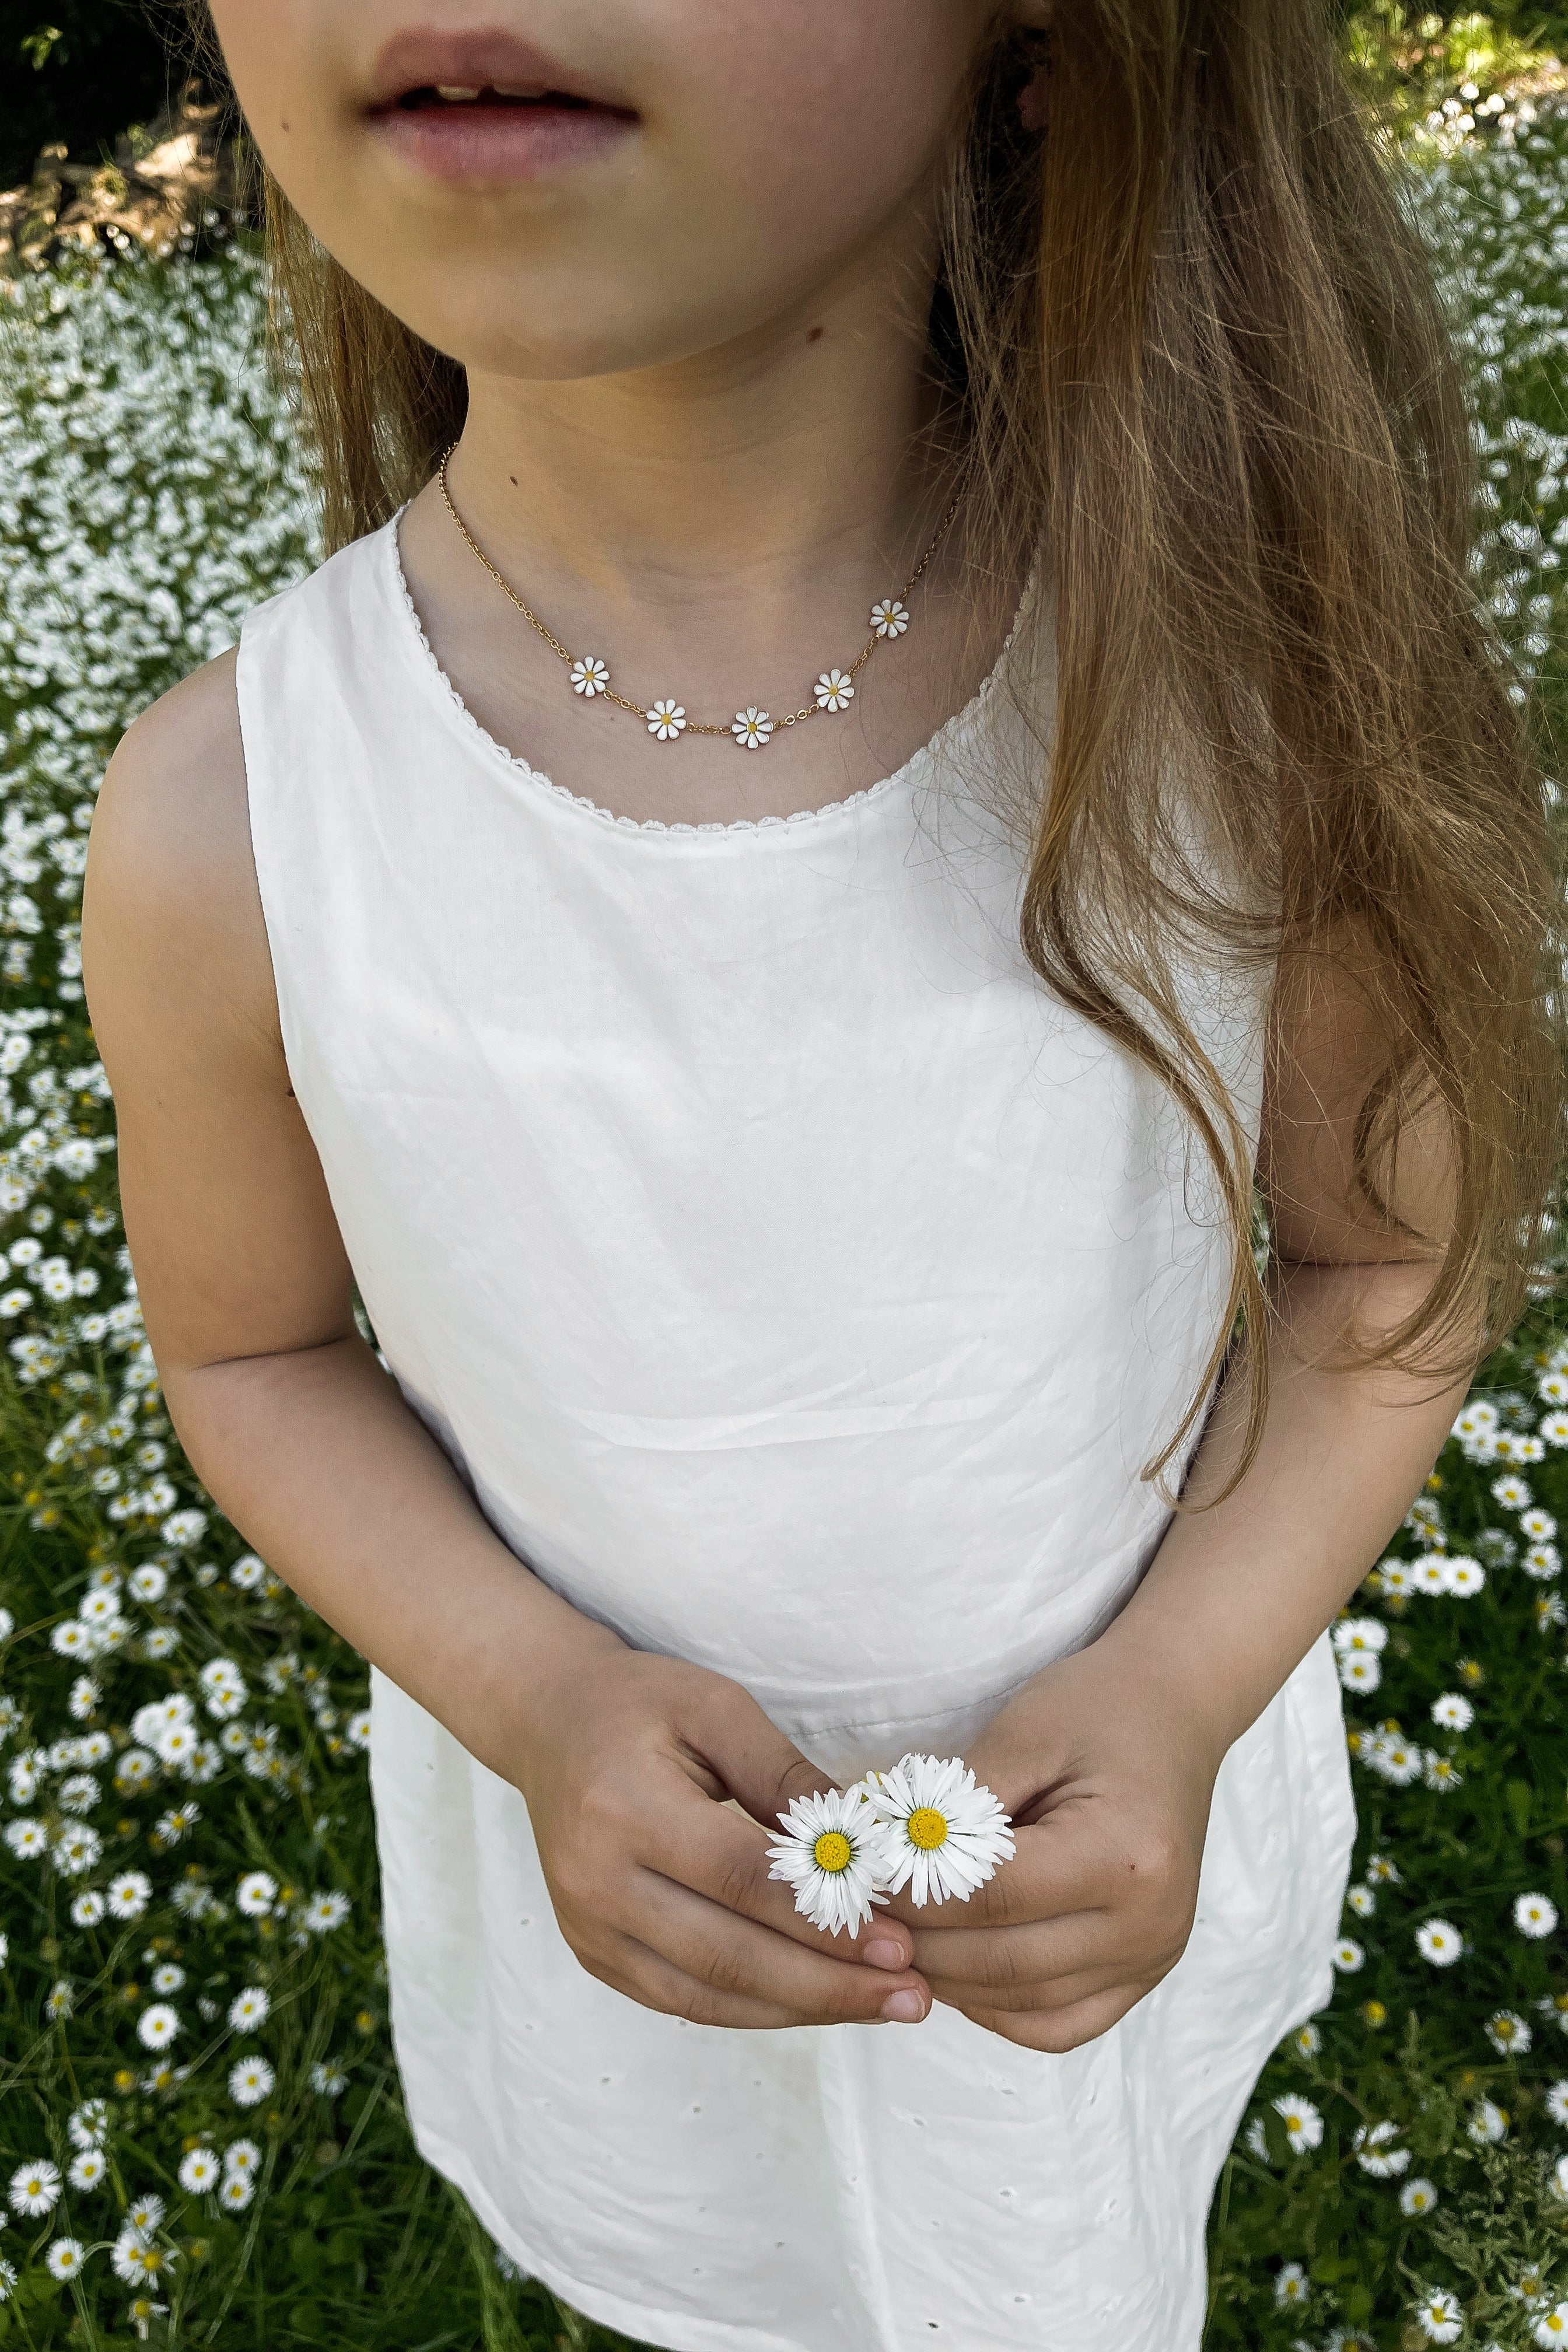 Valery (children) Necklace - Boutique Minimaliste has waterproof, durable, elegant and vintage inspired jewelry